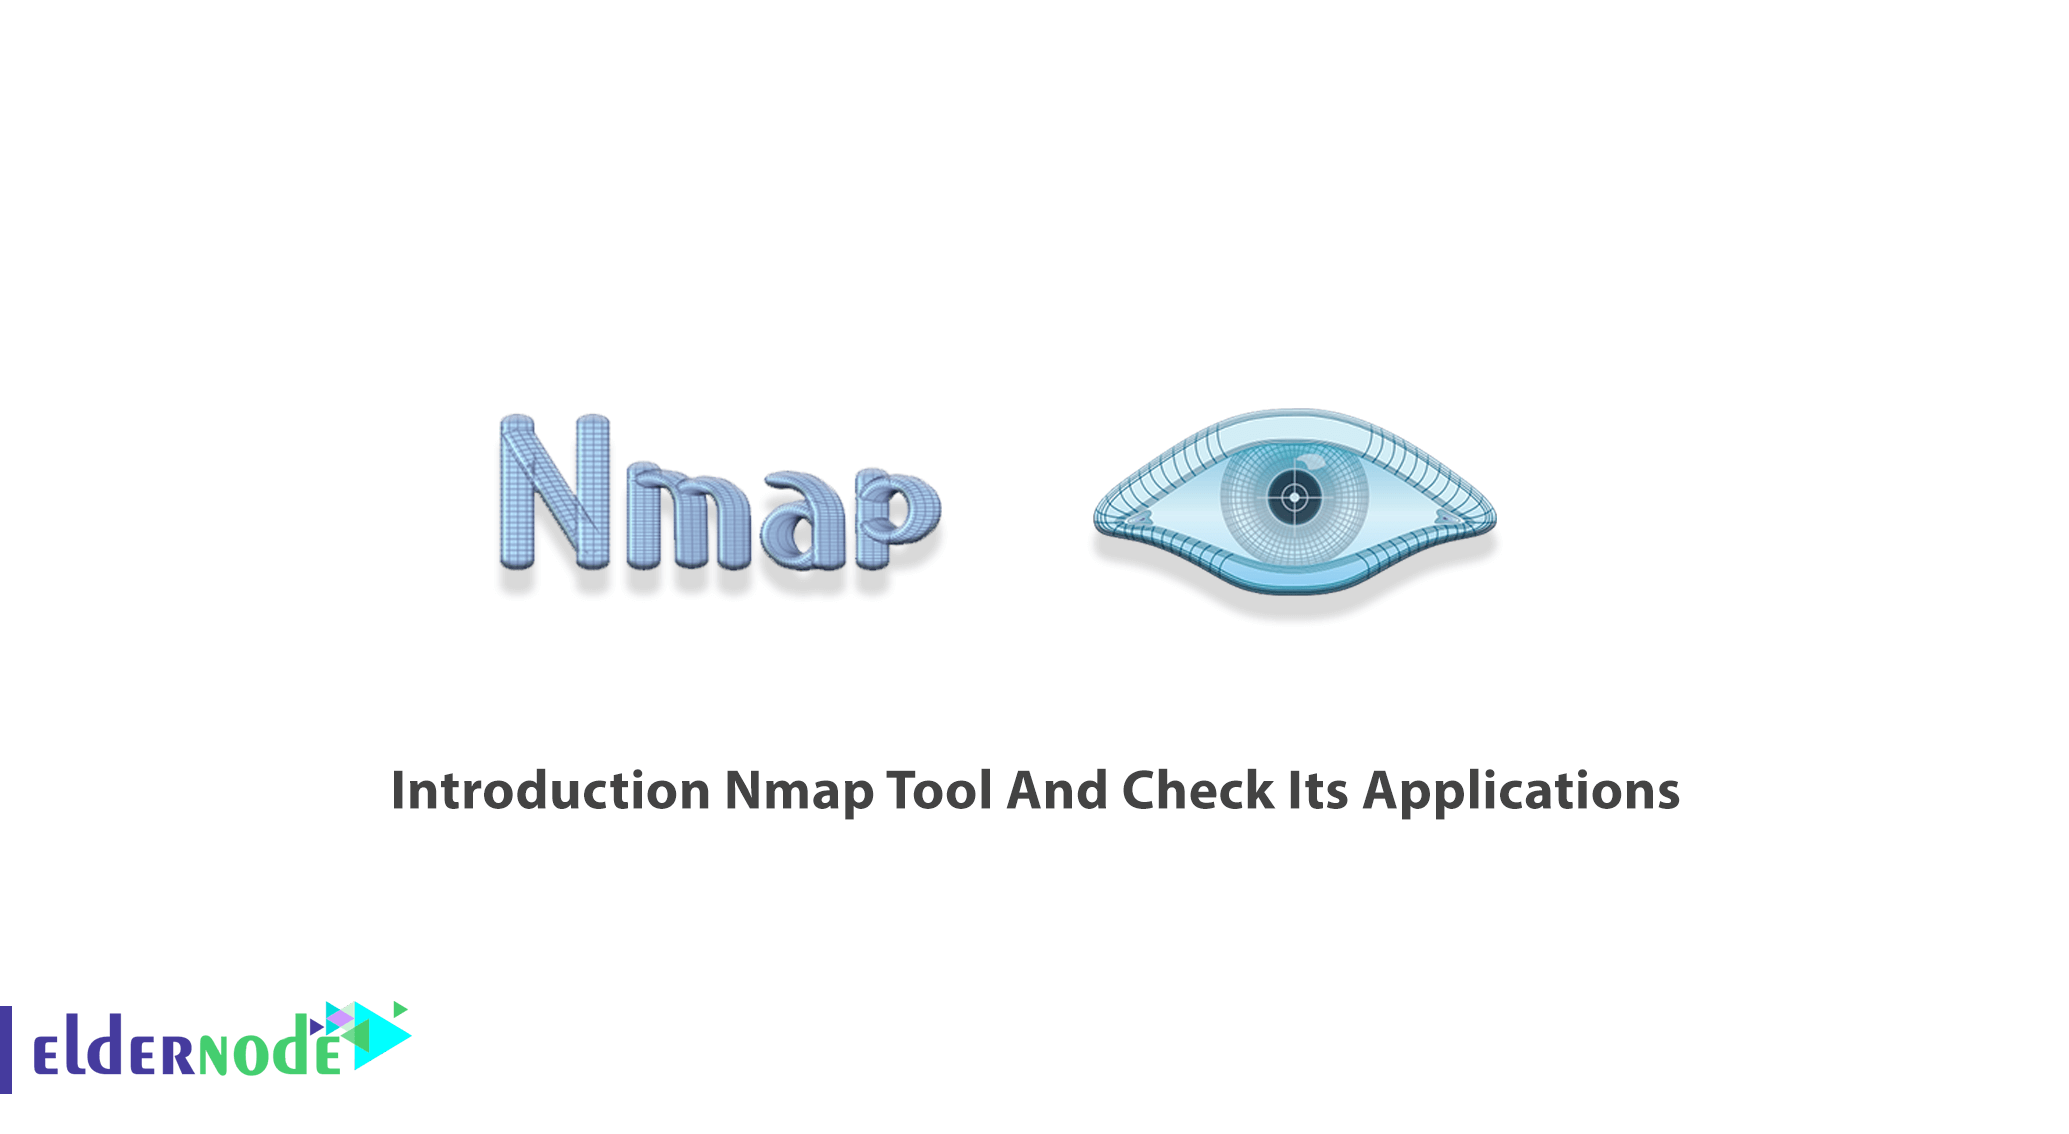 Introduction Nmap Tool And Check Its Applications